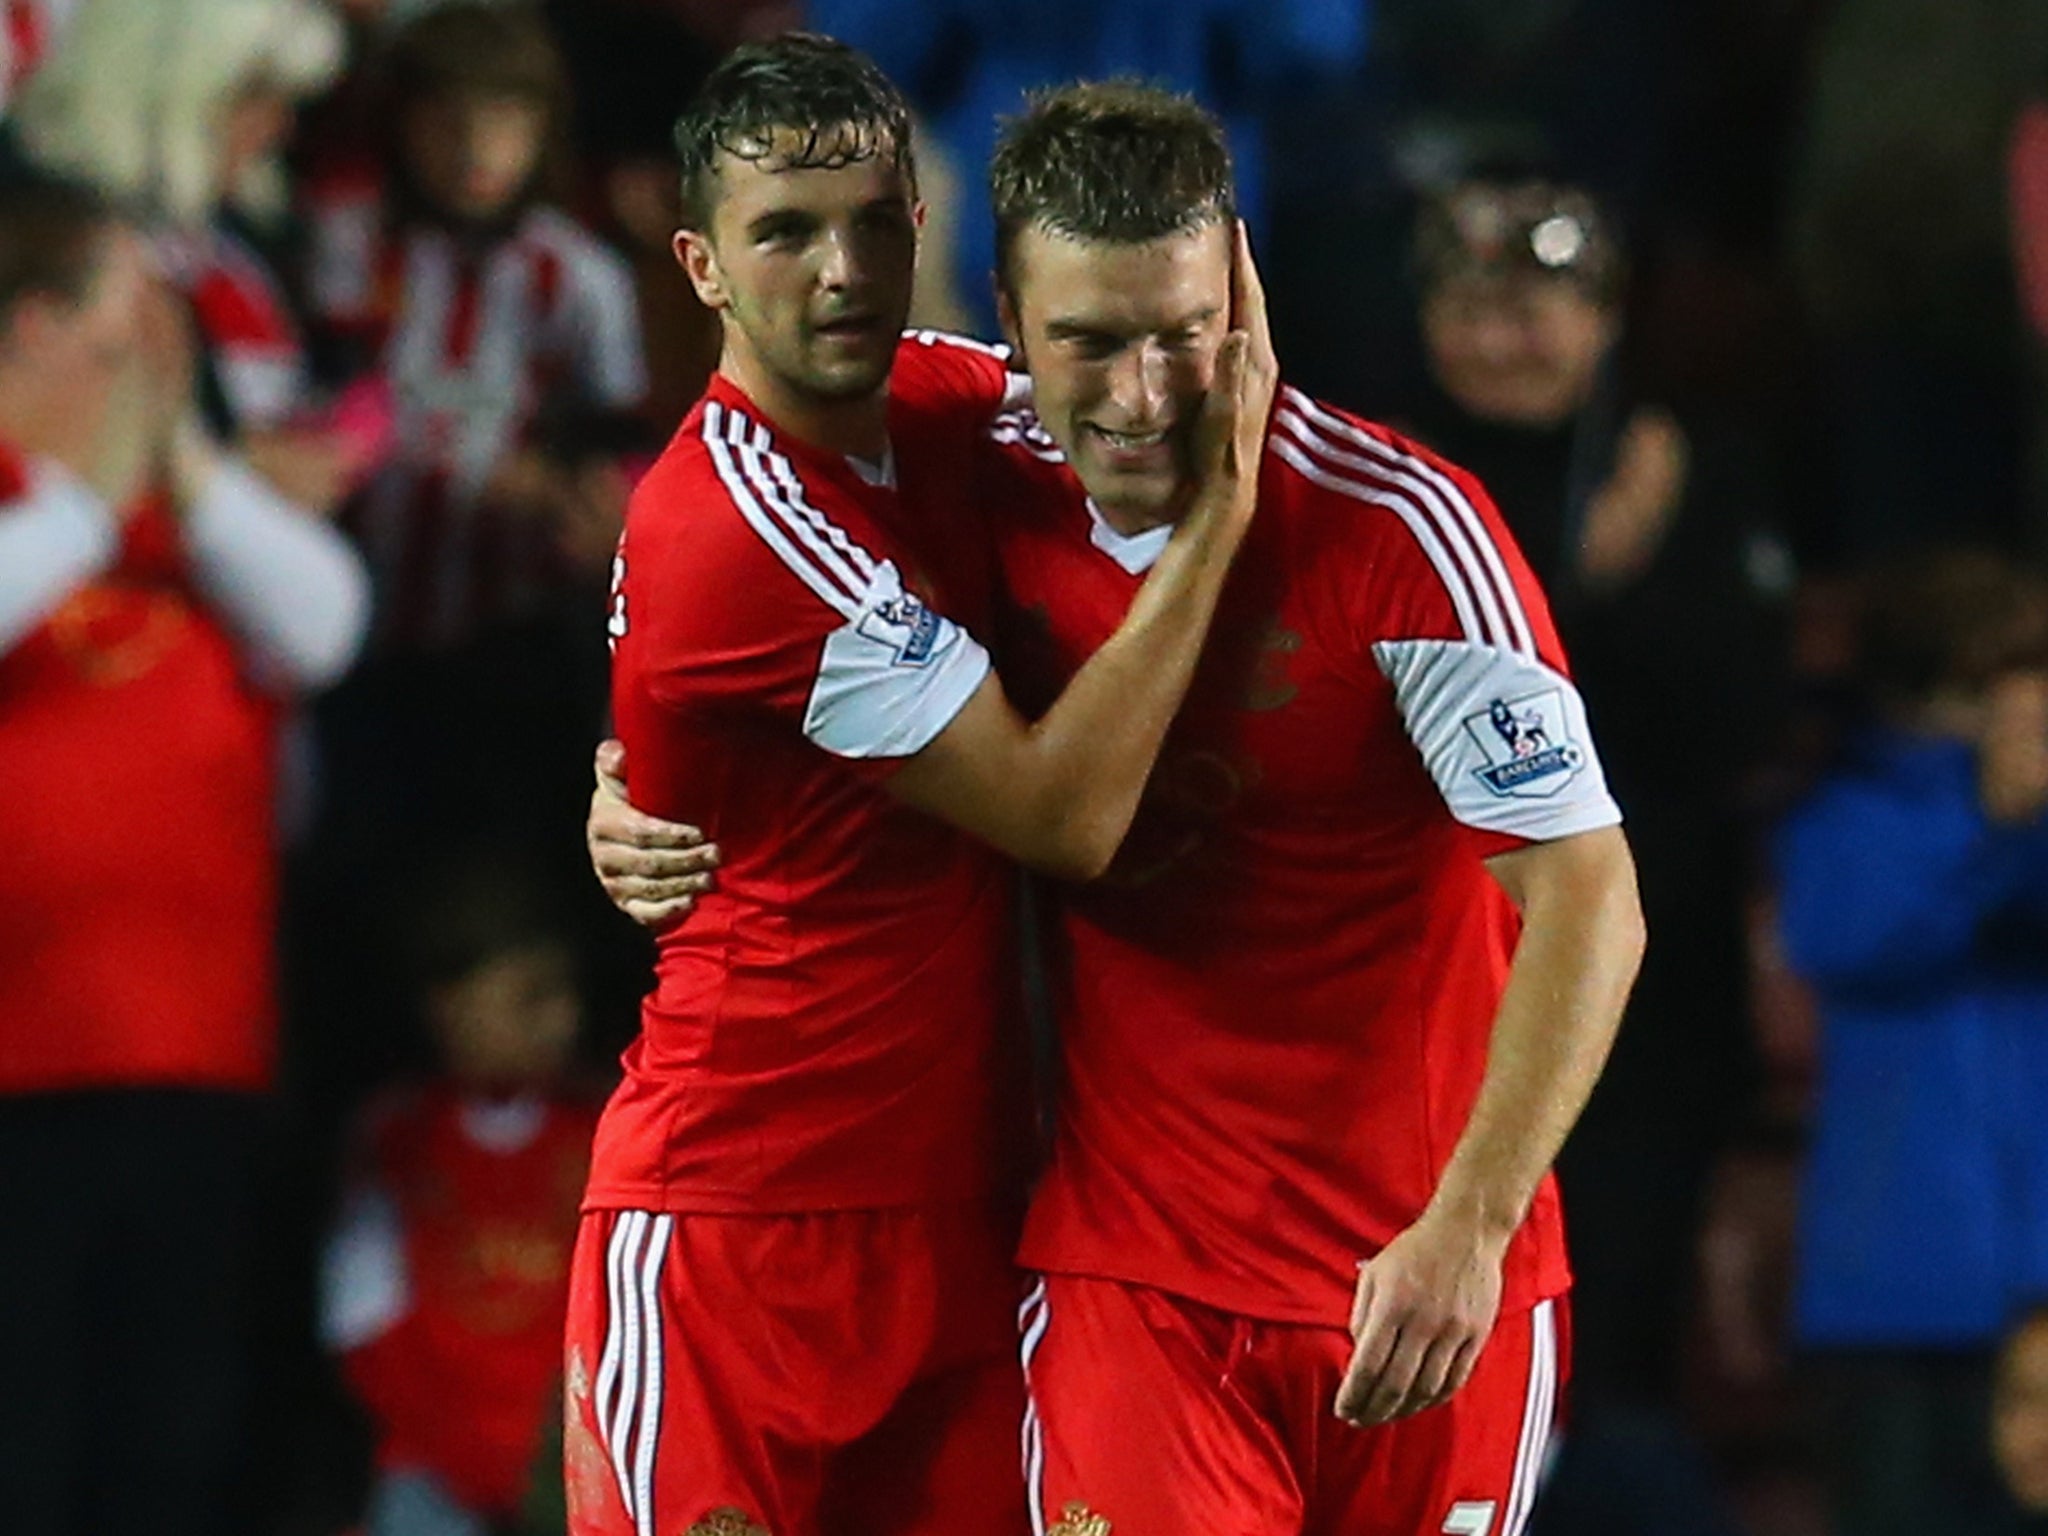 Southampton strikers Jay Rodriguez and Rickie Lambert are both expected to feature against Hull